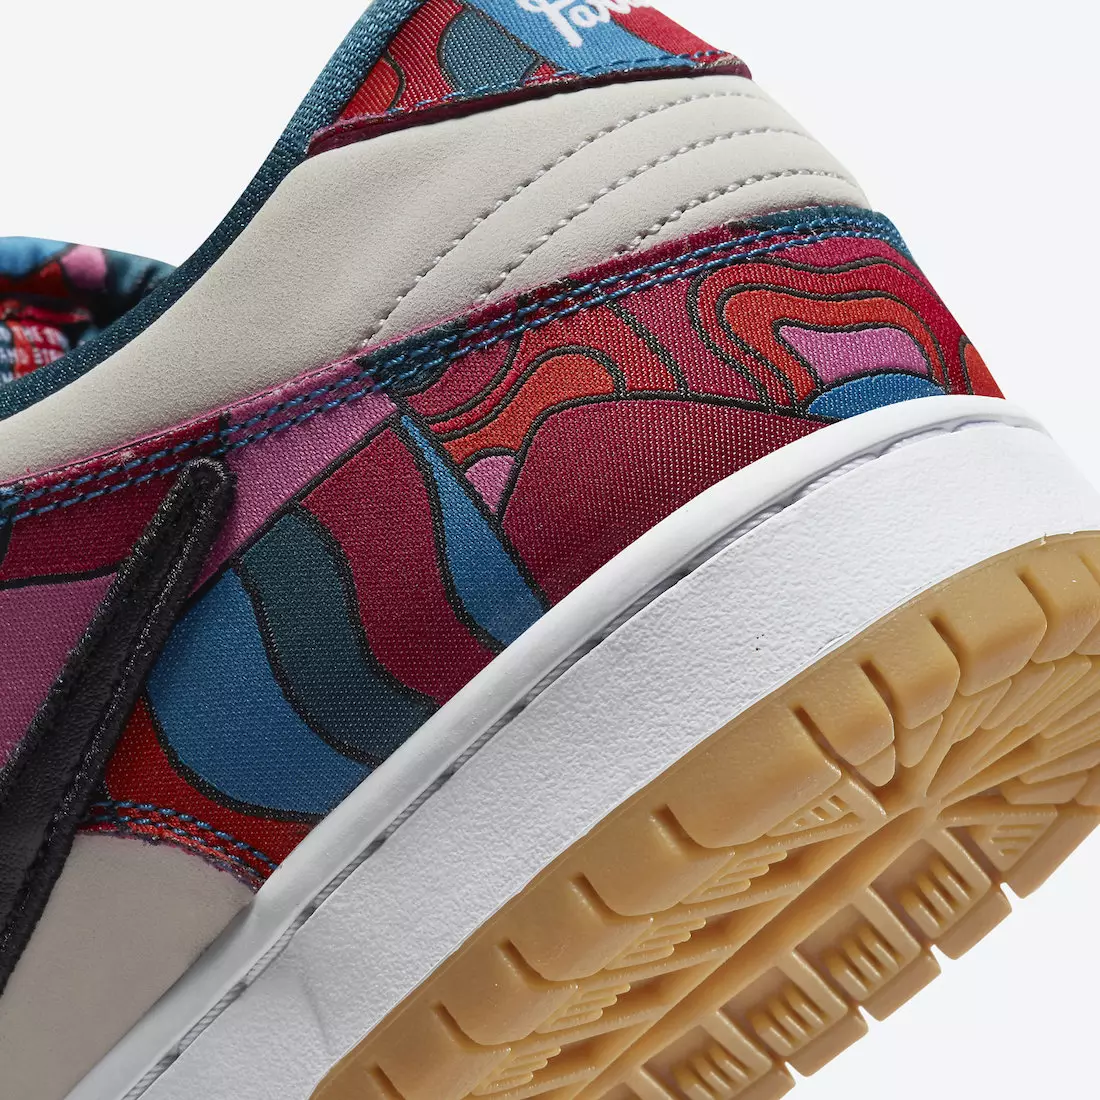 Parra Nike SB Dunk Low DH7695-600 출시일 가격